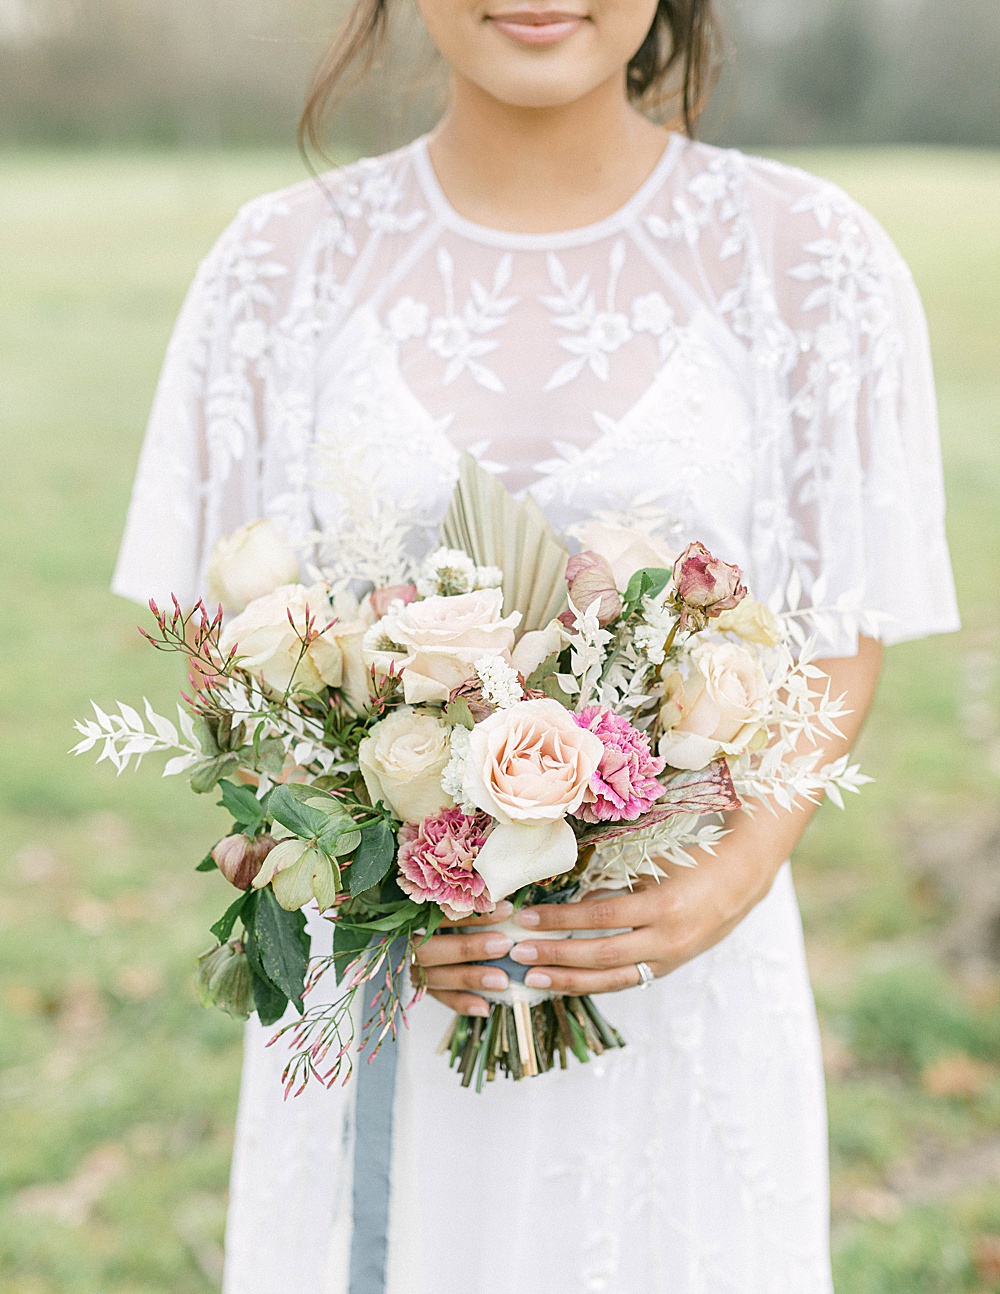 Blush and neutral wedding bouquet with palm fronds for an Atlanta elopement